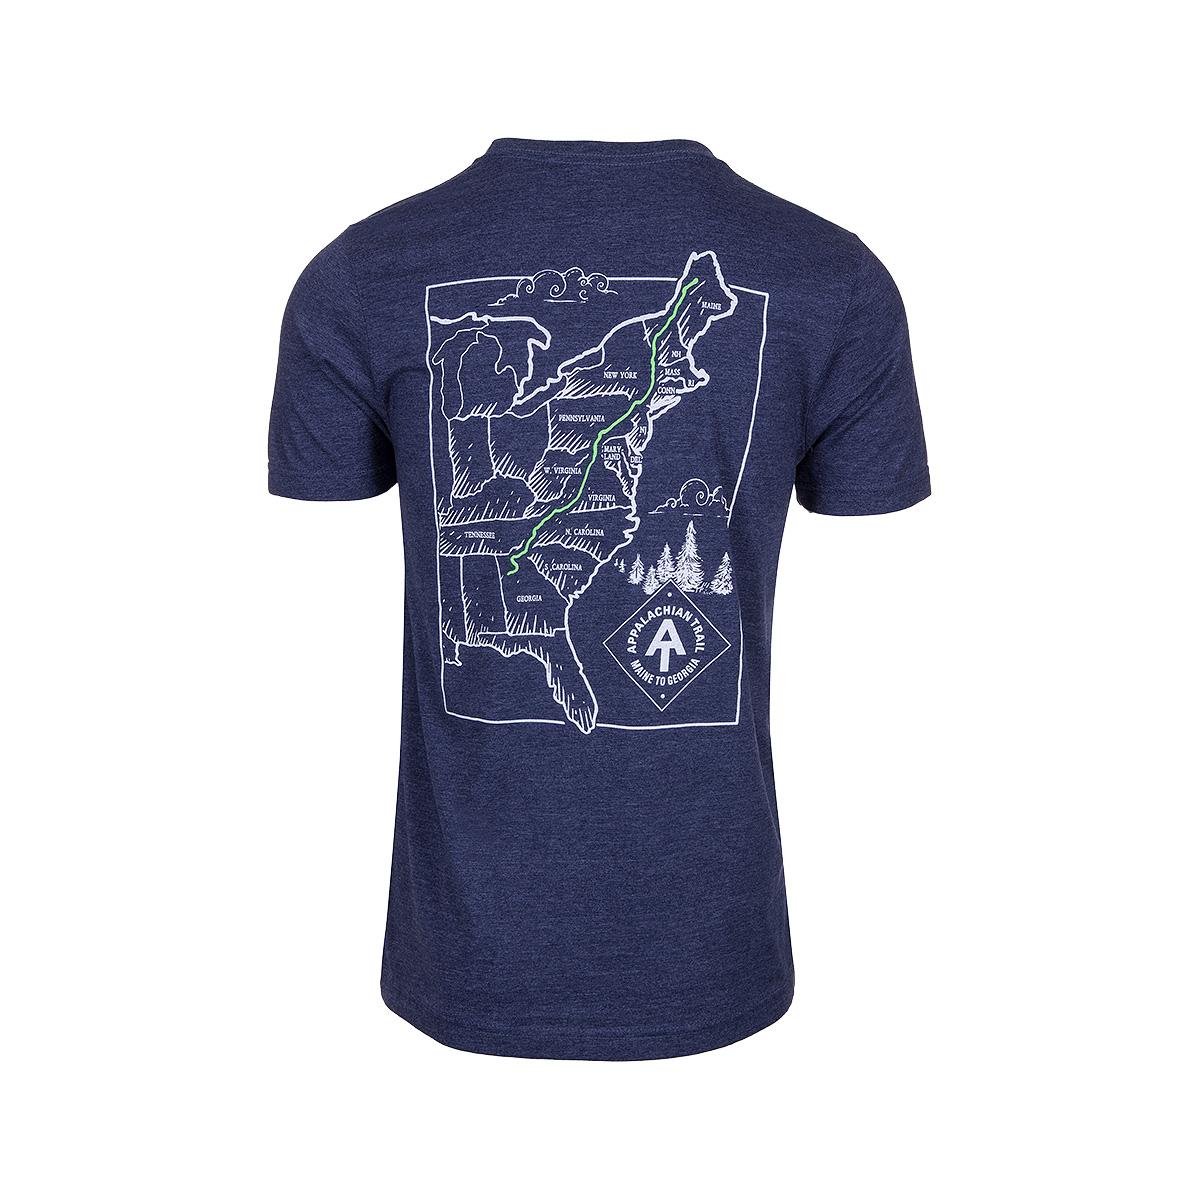 Appalachian Trail T Shirt With Map On Back 